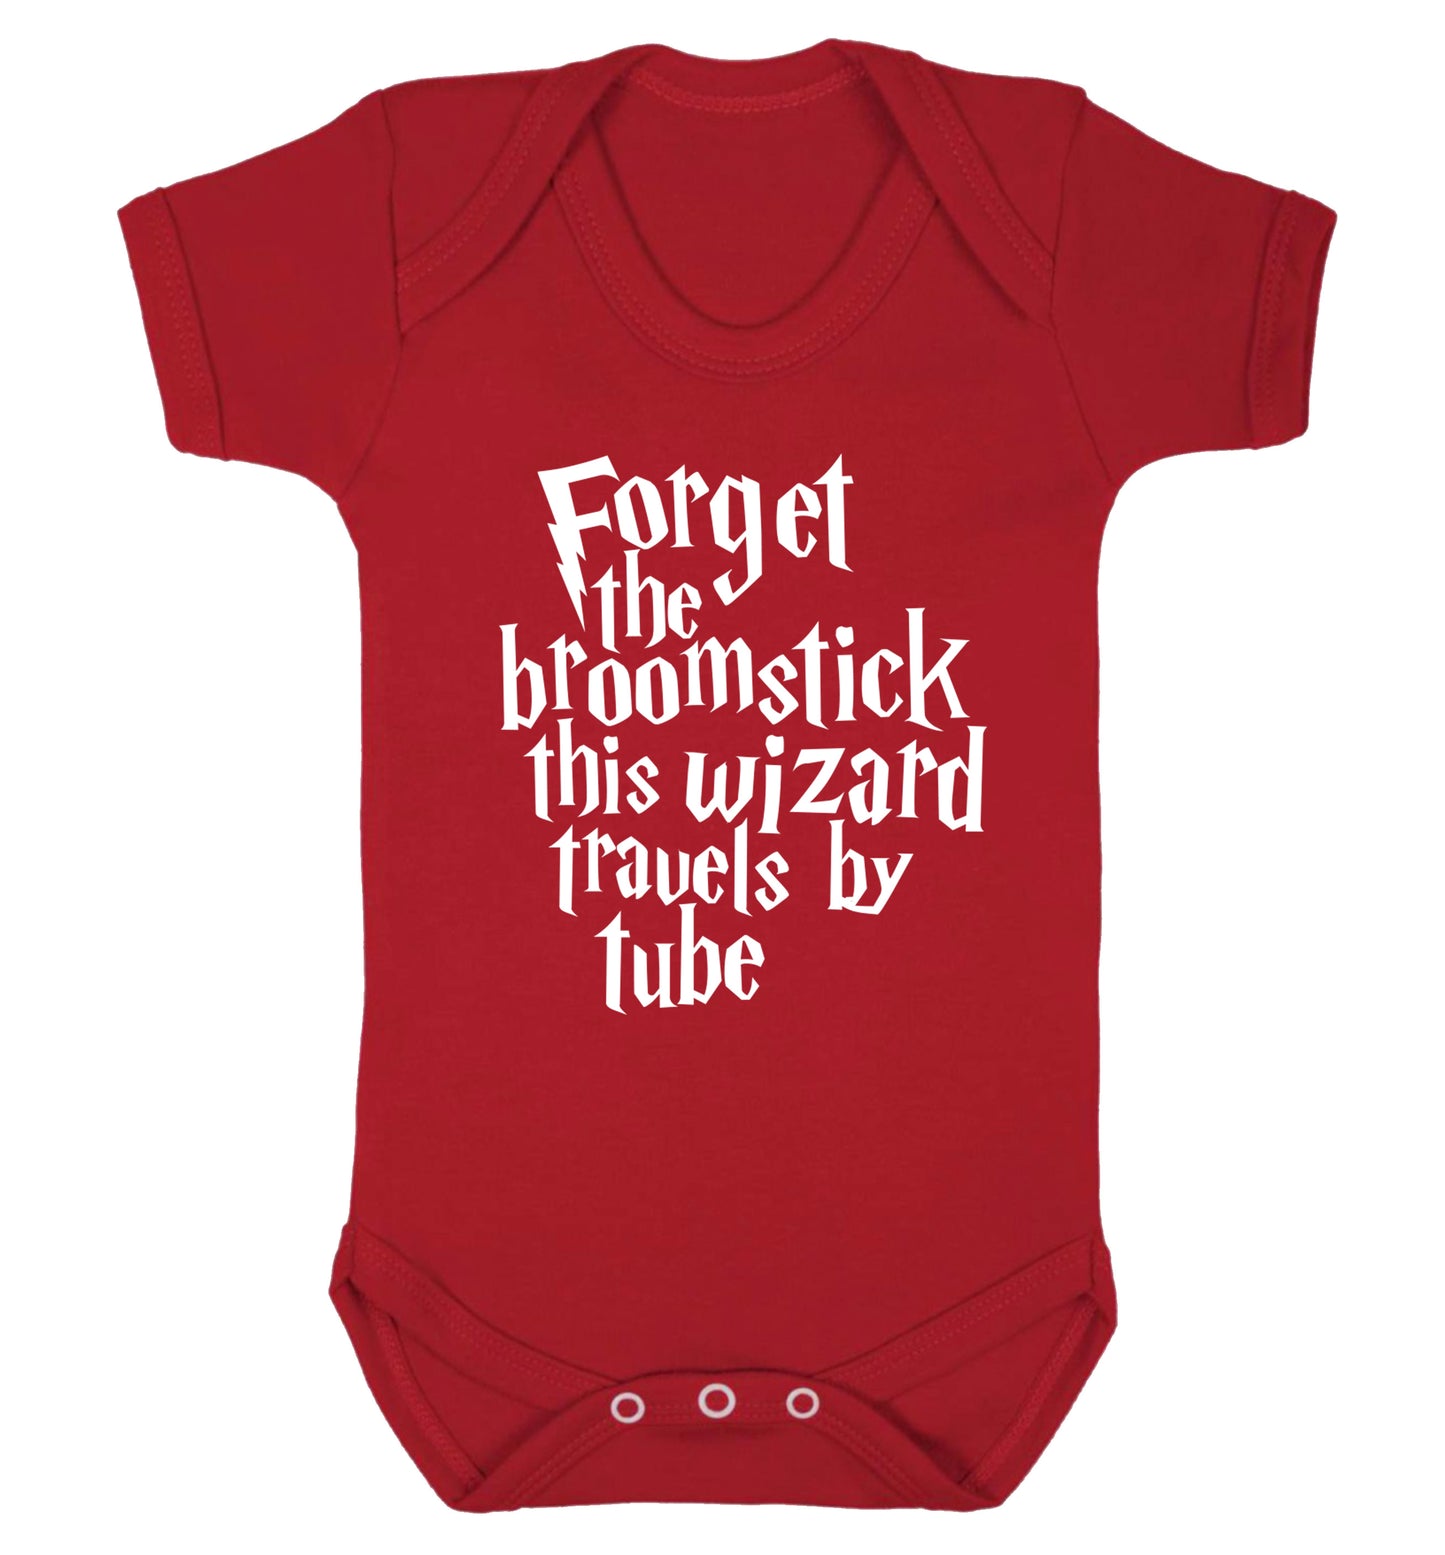 Forget the broomstick this wizard travels by tube Baby Vest red 18-24 months